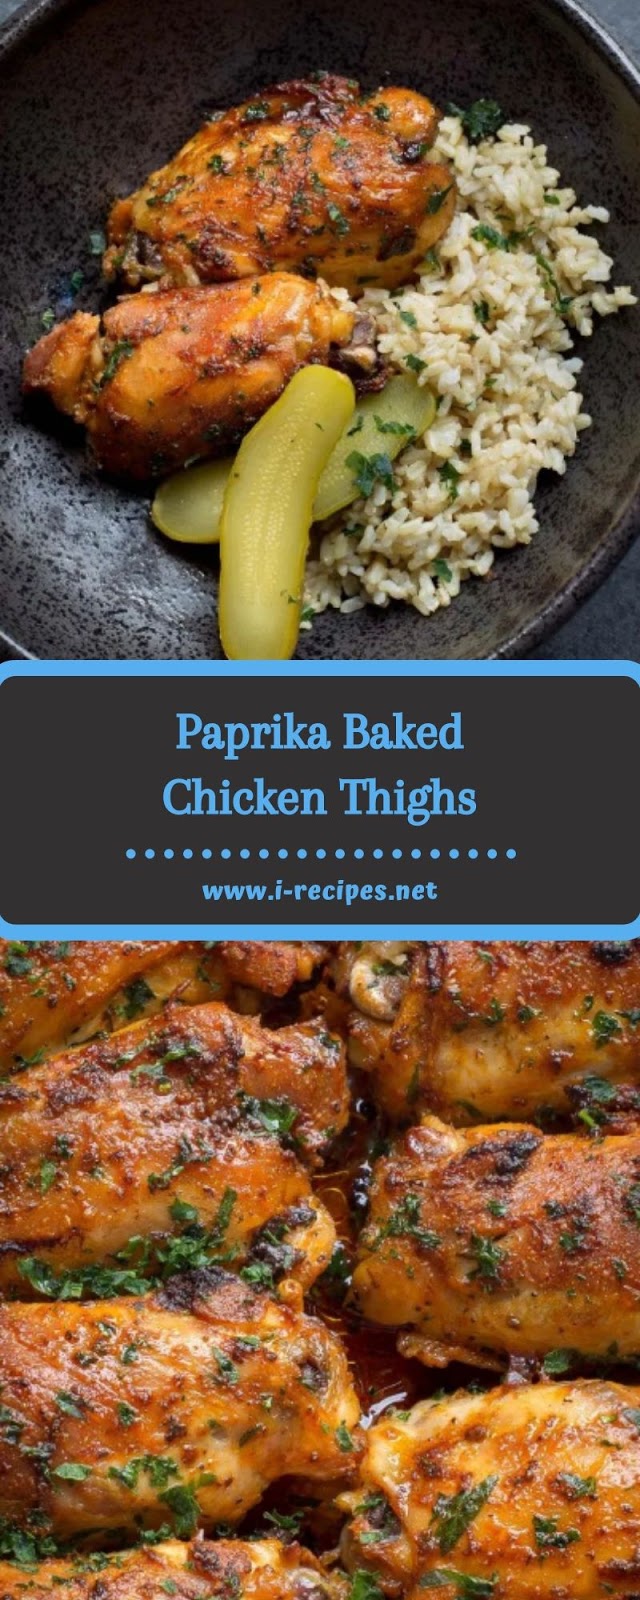 Paprika Baked Chicken Thighs